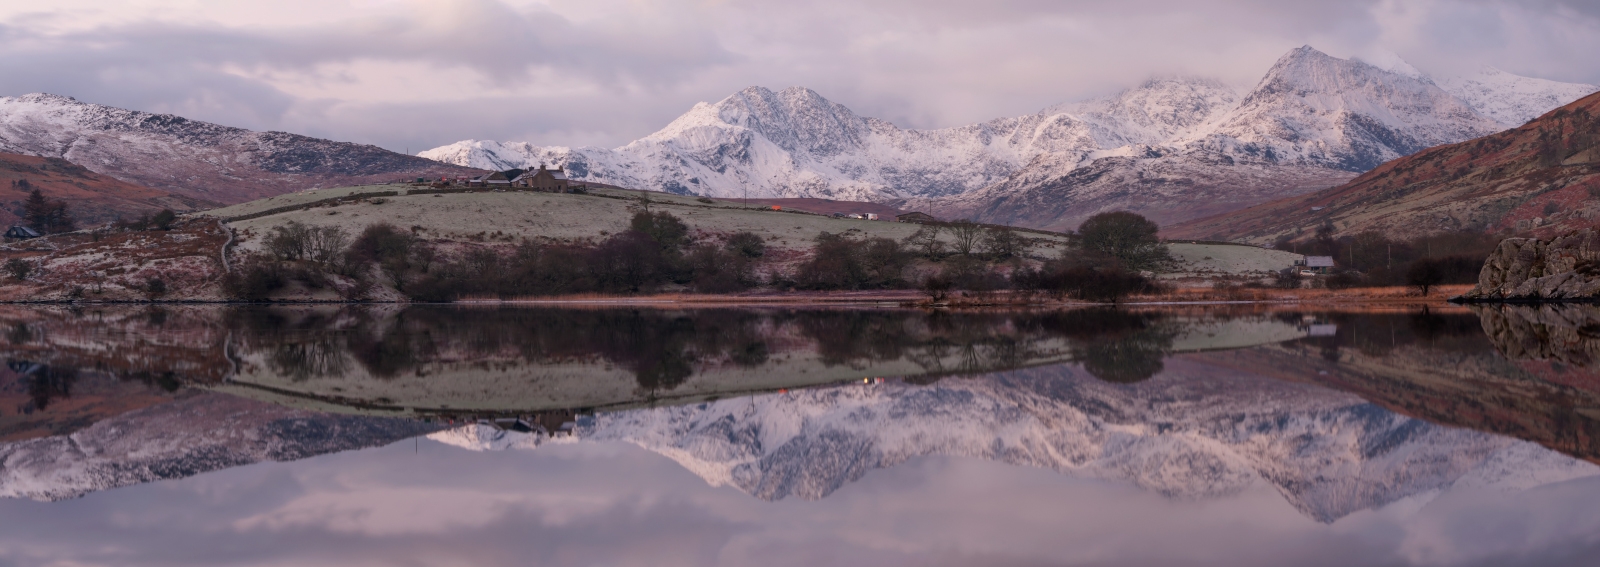 Snowdonia Wales landscape photography at Winter/Welsh Winter landscape photography prints